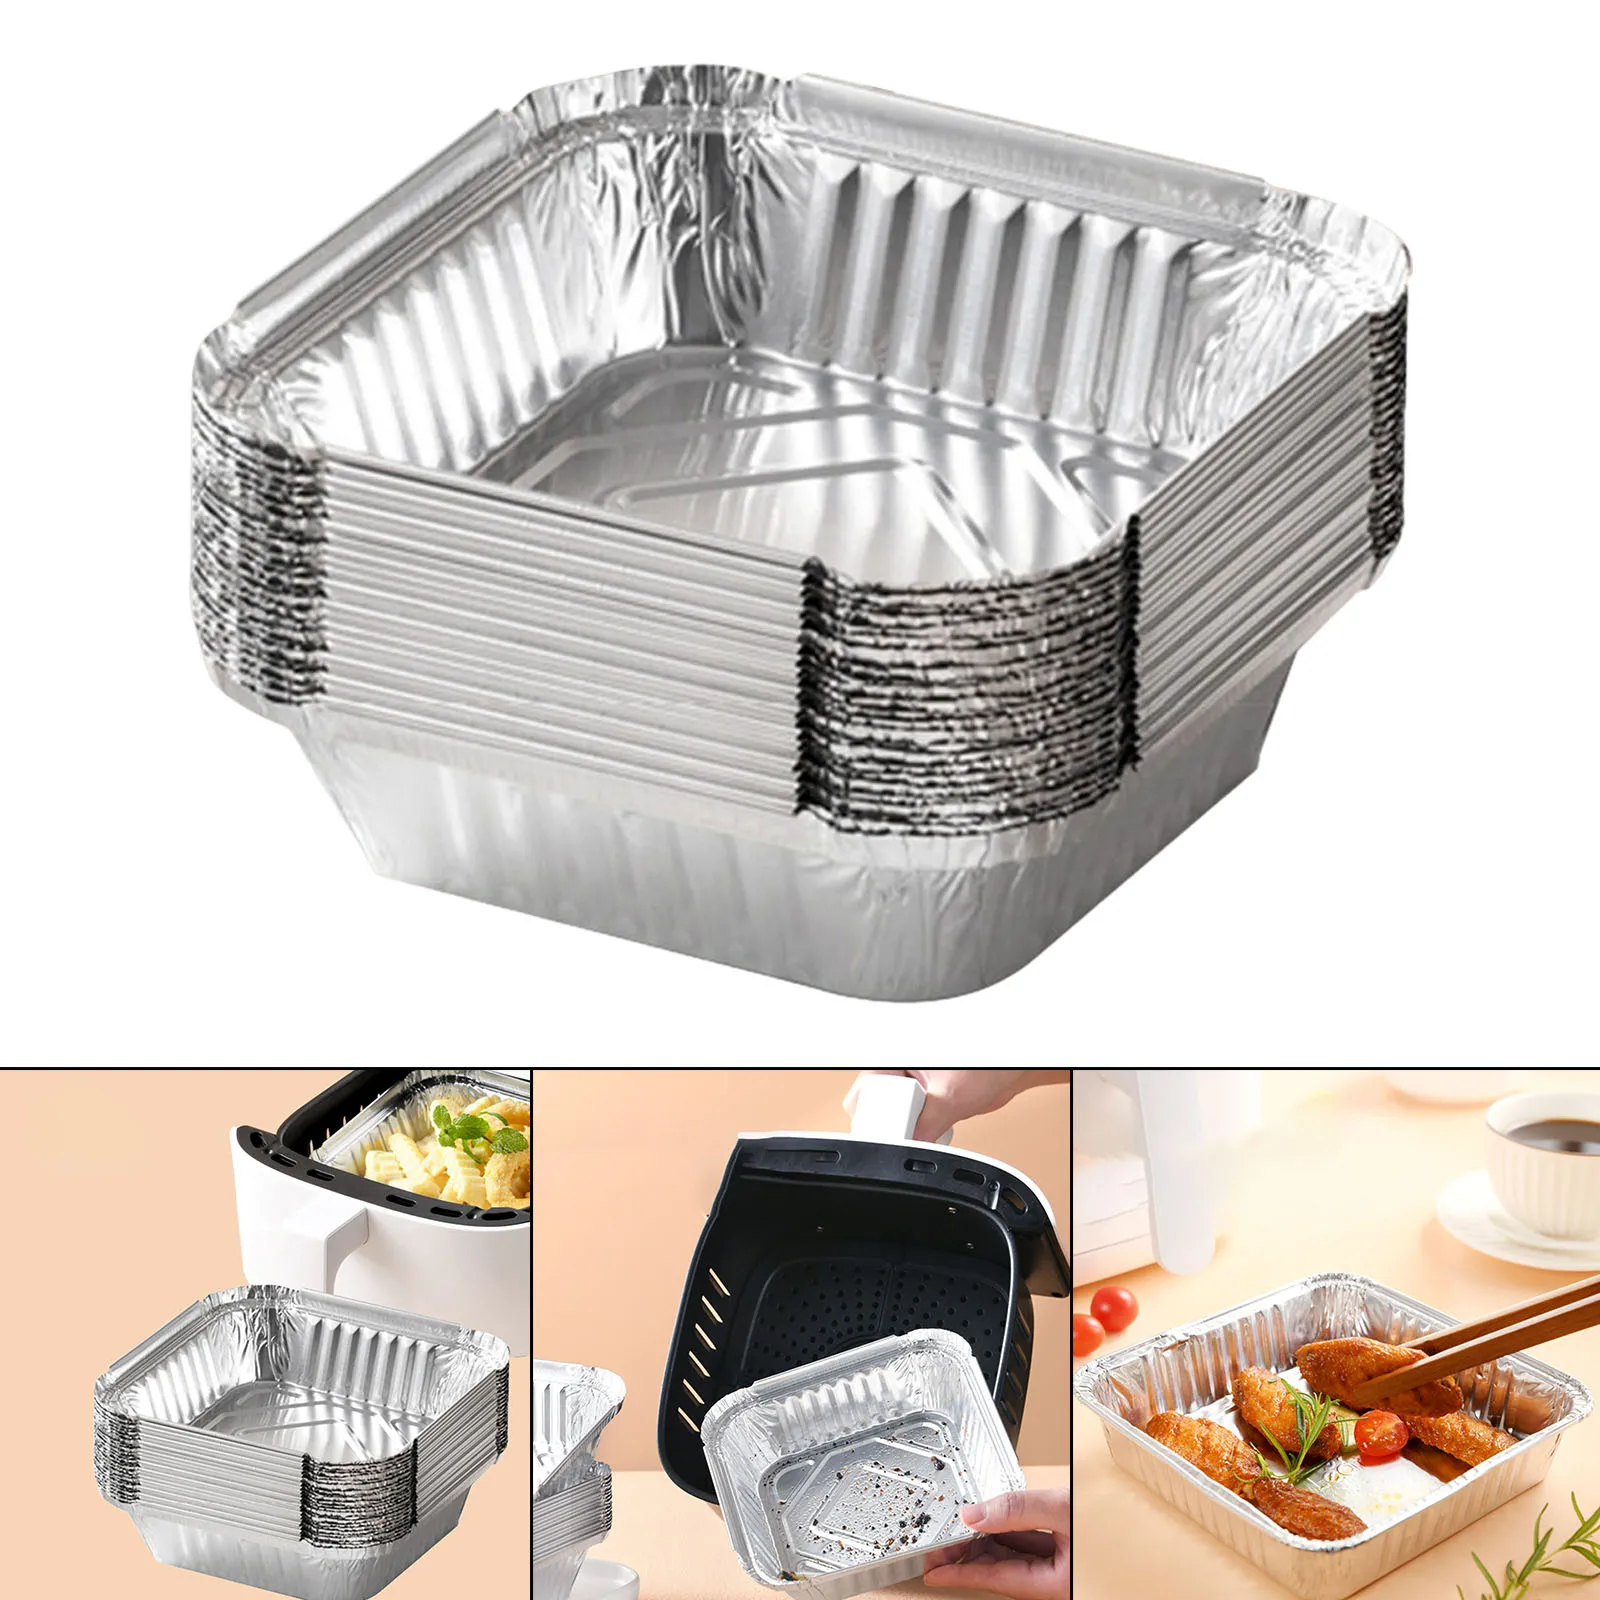 https://ae01.alicdn.com/kf/S62f6af7e61f048689cddb09e85cb465cx/20Pcs-Tin-Foil-Tray-AirFryer-Disposable-Food-Containers-Bowls-BBQ-Take-Away-Cake-Boxes-Aluminum-Packaging.jpg